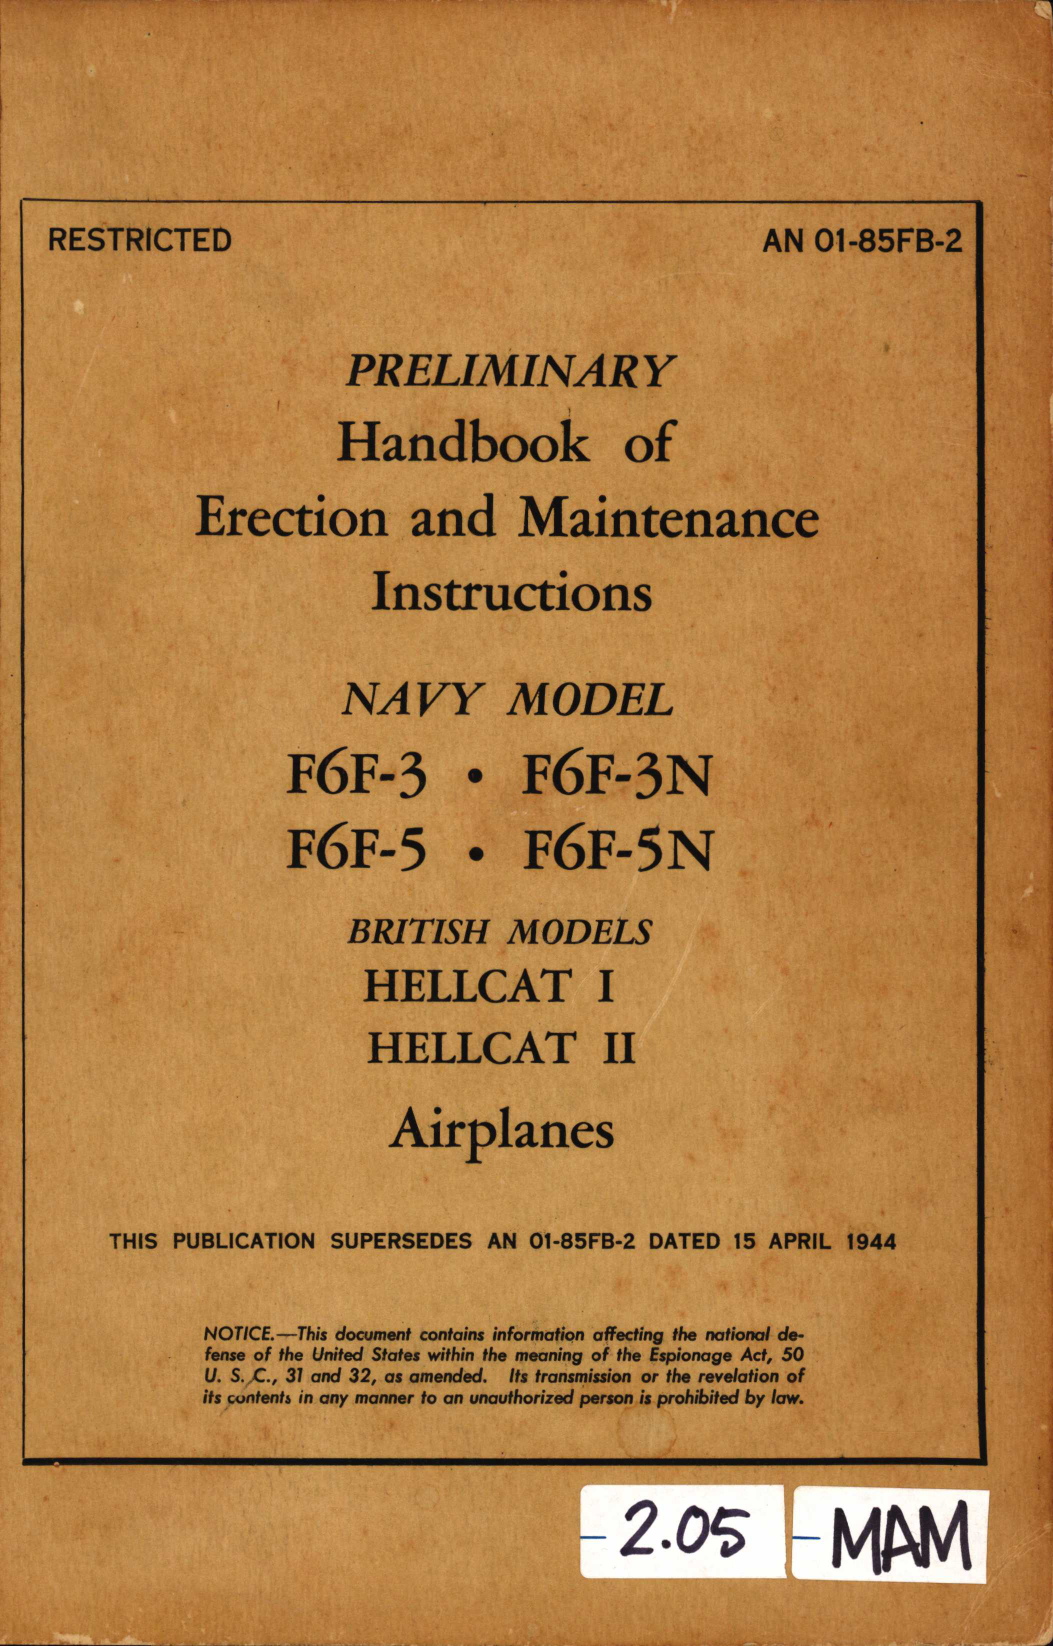 Sample page 1 from AirCorps Library document: Erection and Maintenance for F6F-3, F6F-3N, F6F-5, and F6F-5N 